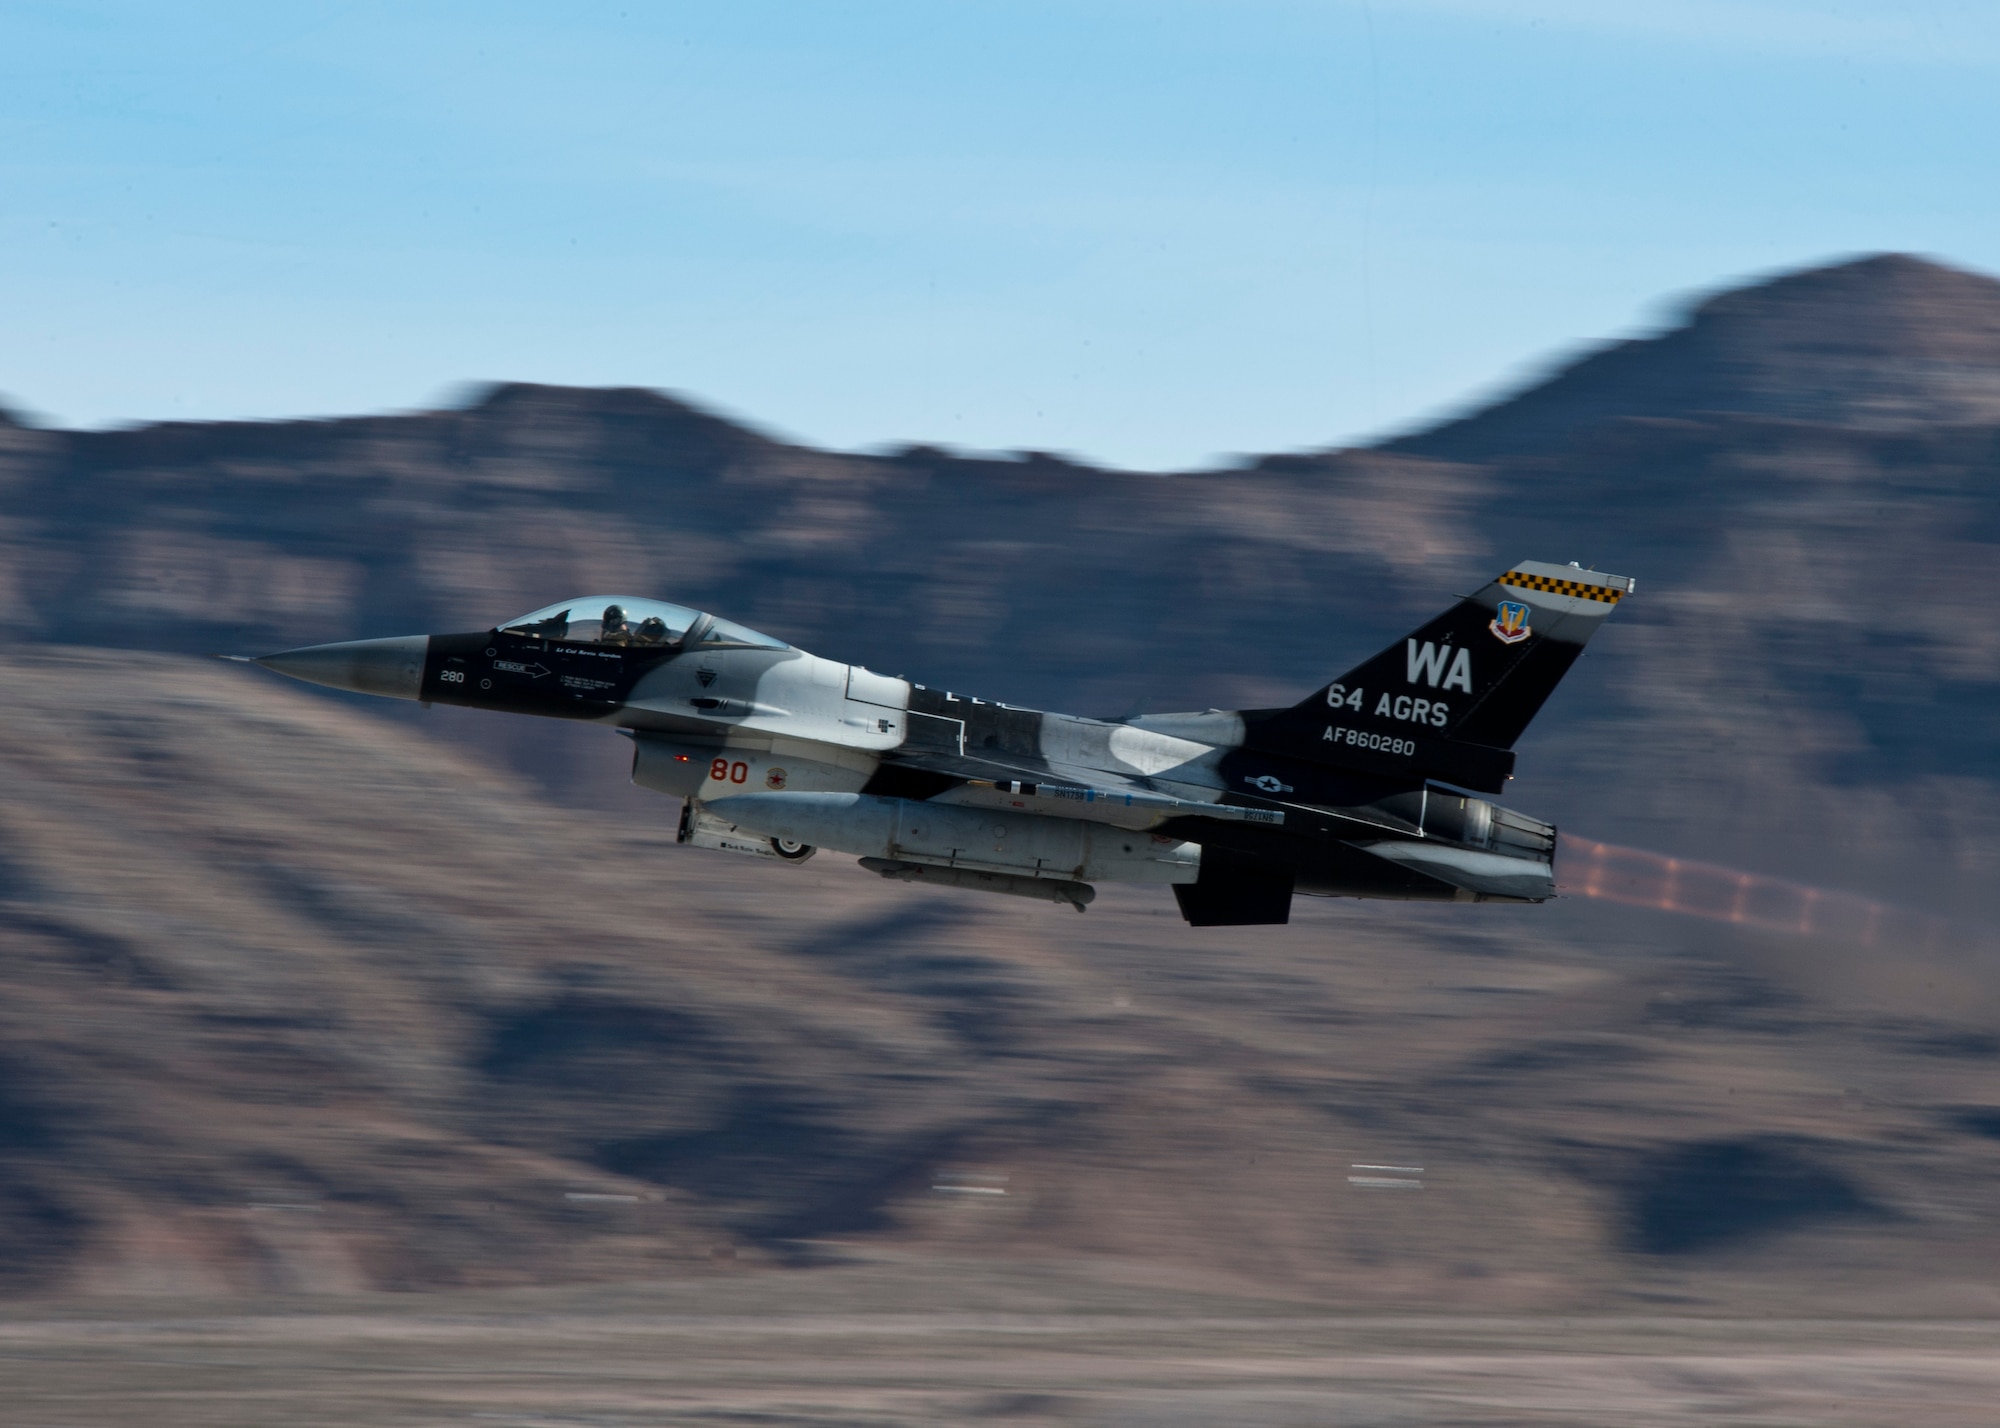 An F-16 Fighting Falcon assigned to the 64th Aggressors Squadron at Nellis Air Force Base, Nev. takes off during Red Flag 14-1 at Nellis AFB. The mission of the 414th Combat Training Squadron, the unit that plans and executes Red Flag, is to maximize the combat readiness and survivability of participants by providing a realistic training environment. There are approximately 125 aircraft participating in Red Flag 14-1. (U.S. Air Force photo by Airman 1st Class Jason Couillard)